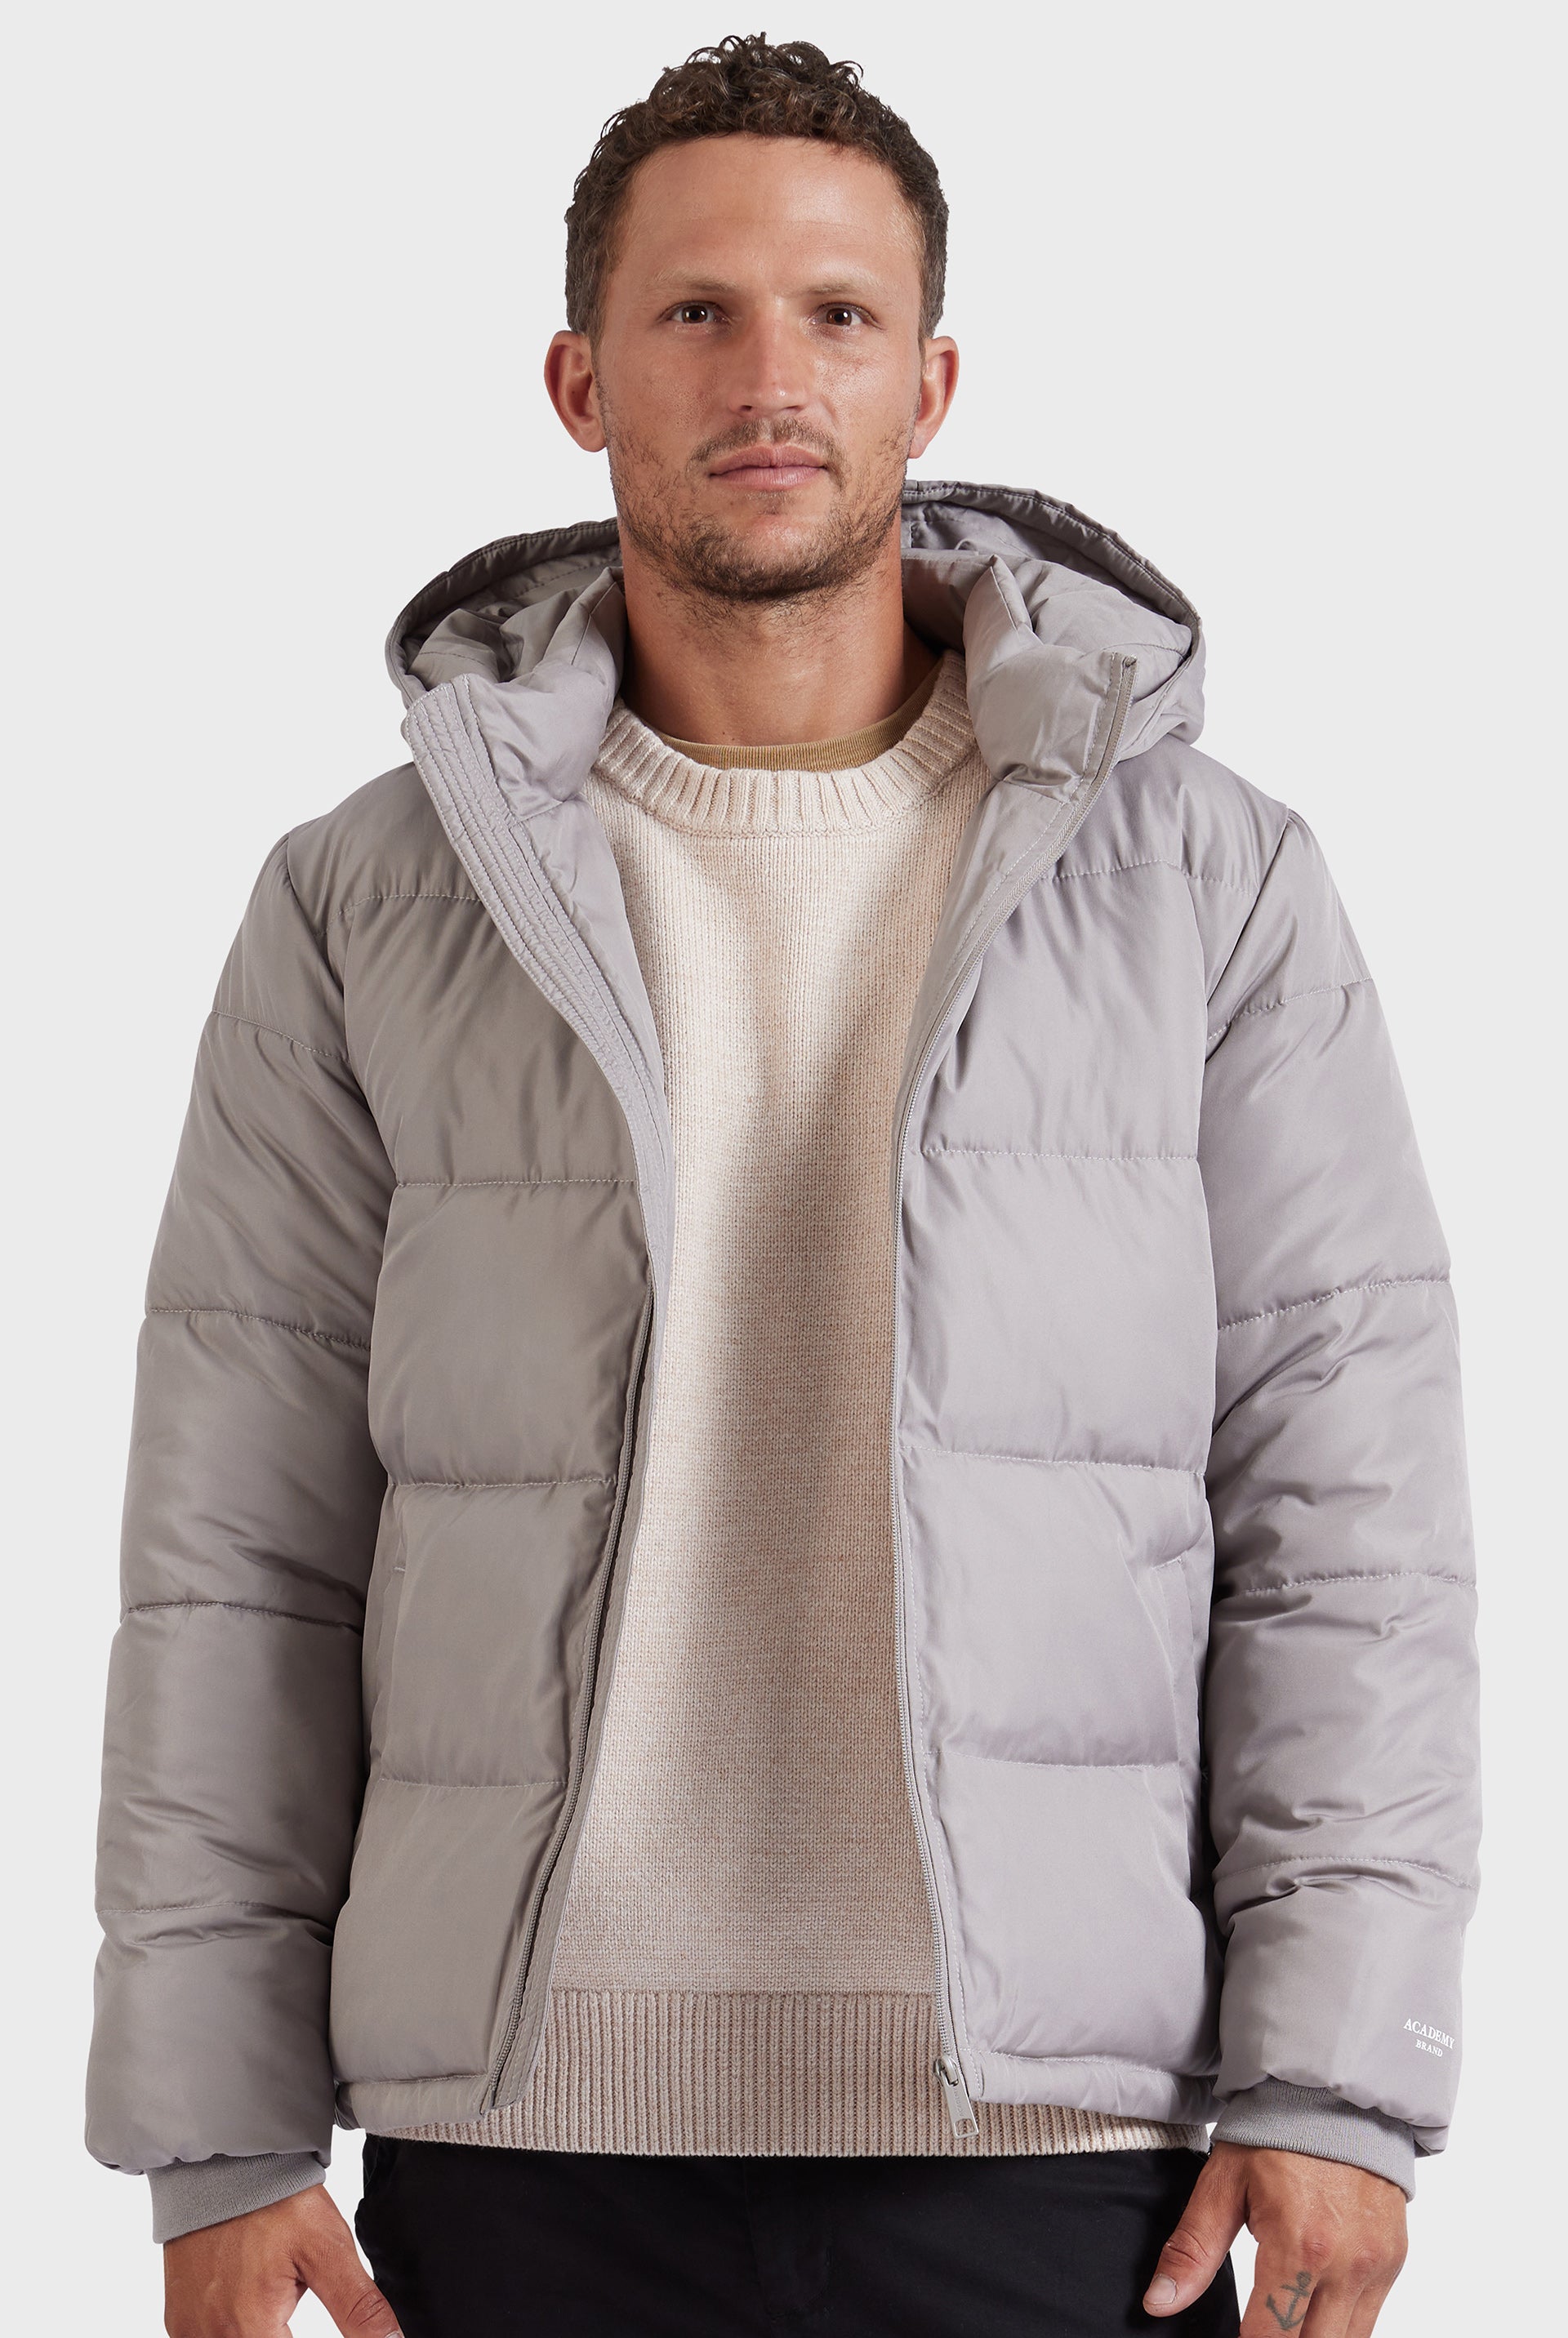 Academy Puffer Jacket in Timber brown | Academy Brand